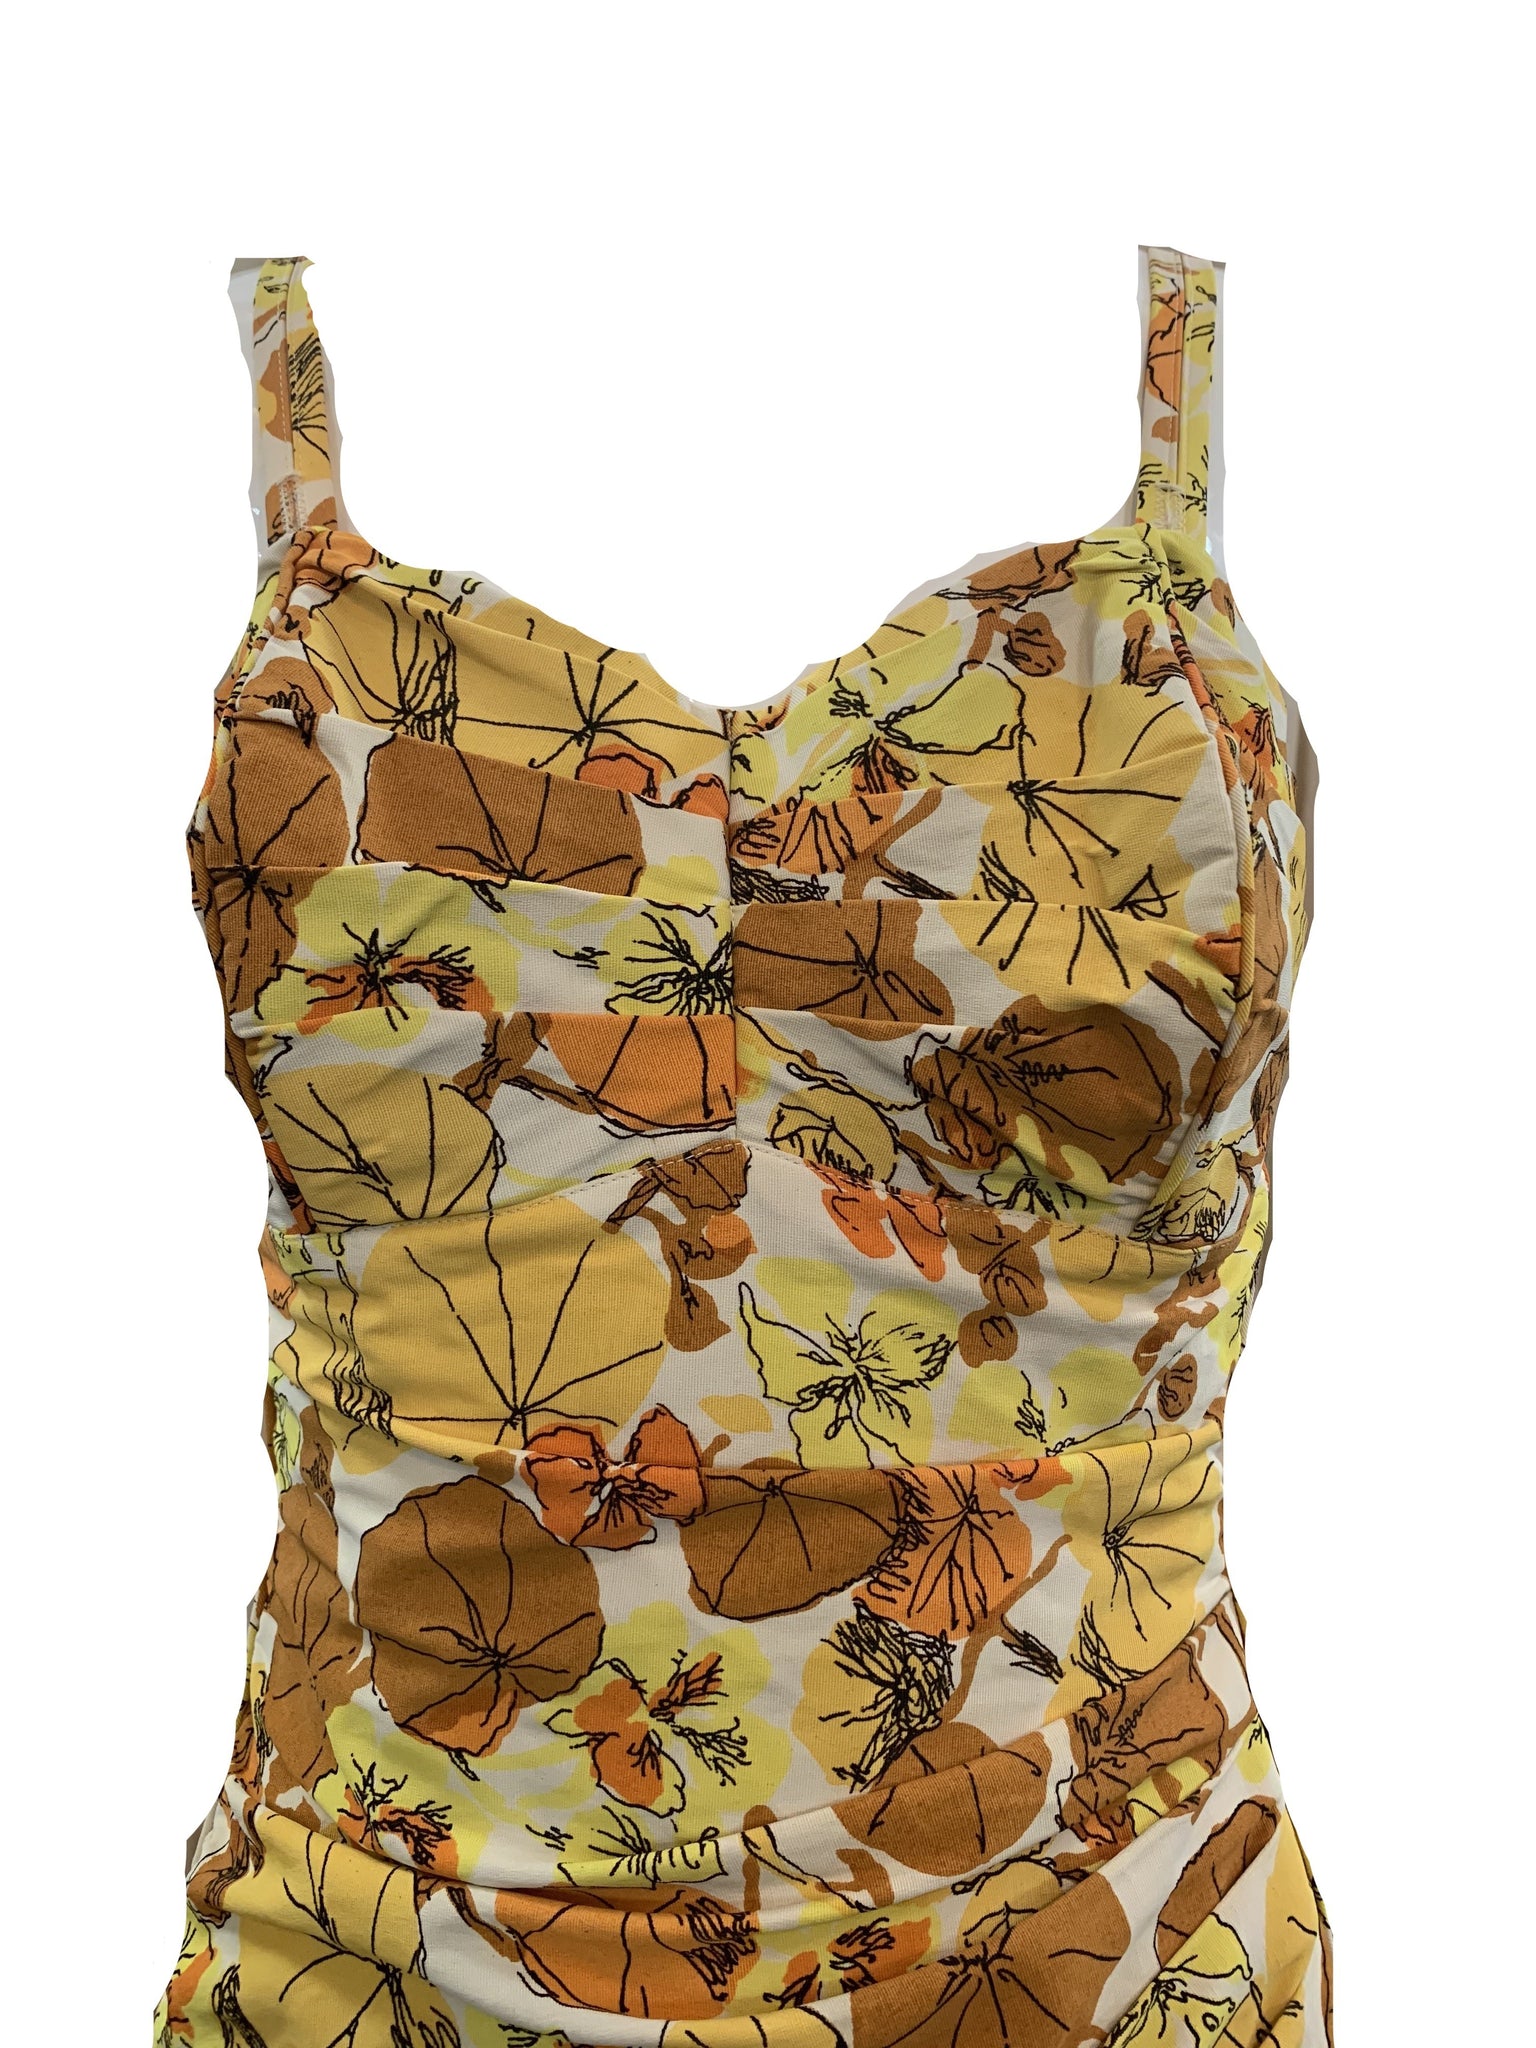 Roxanne 50s Swimsuit in Autumnal Floral Tones  CLOSE UP 3 of 5